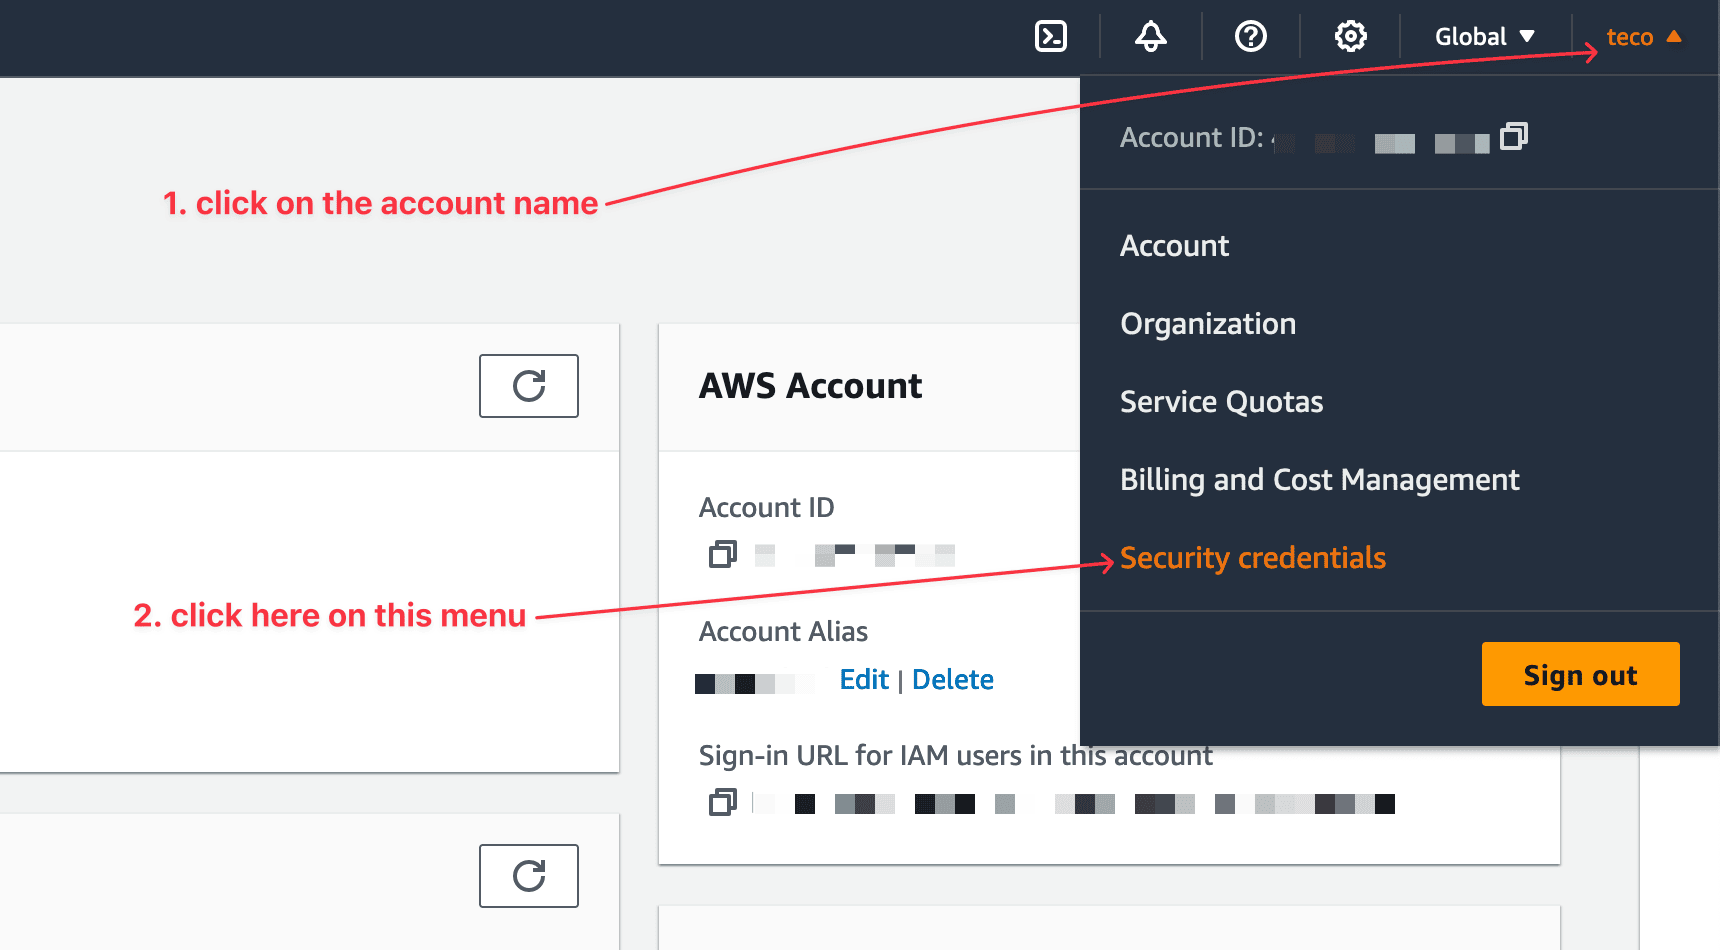 Go to the AWS account security credentials page.